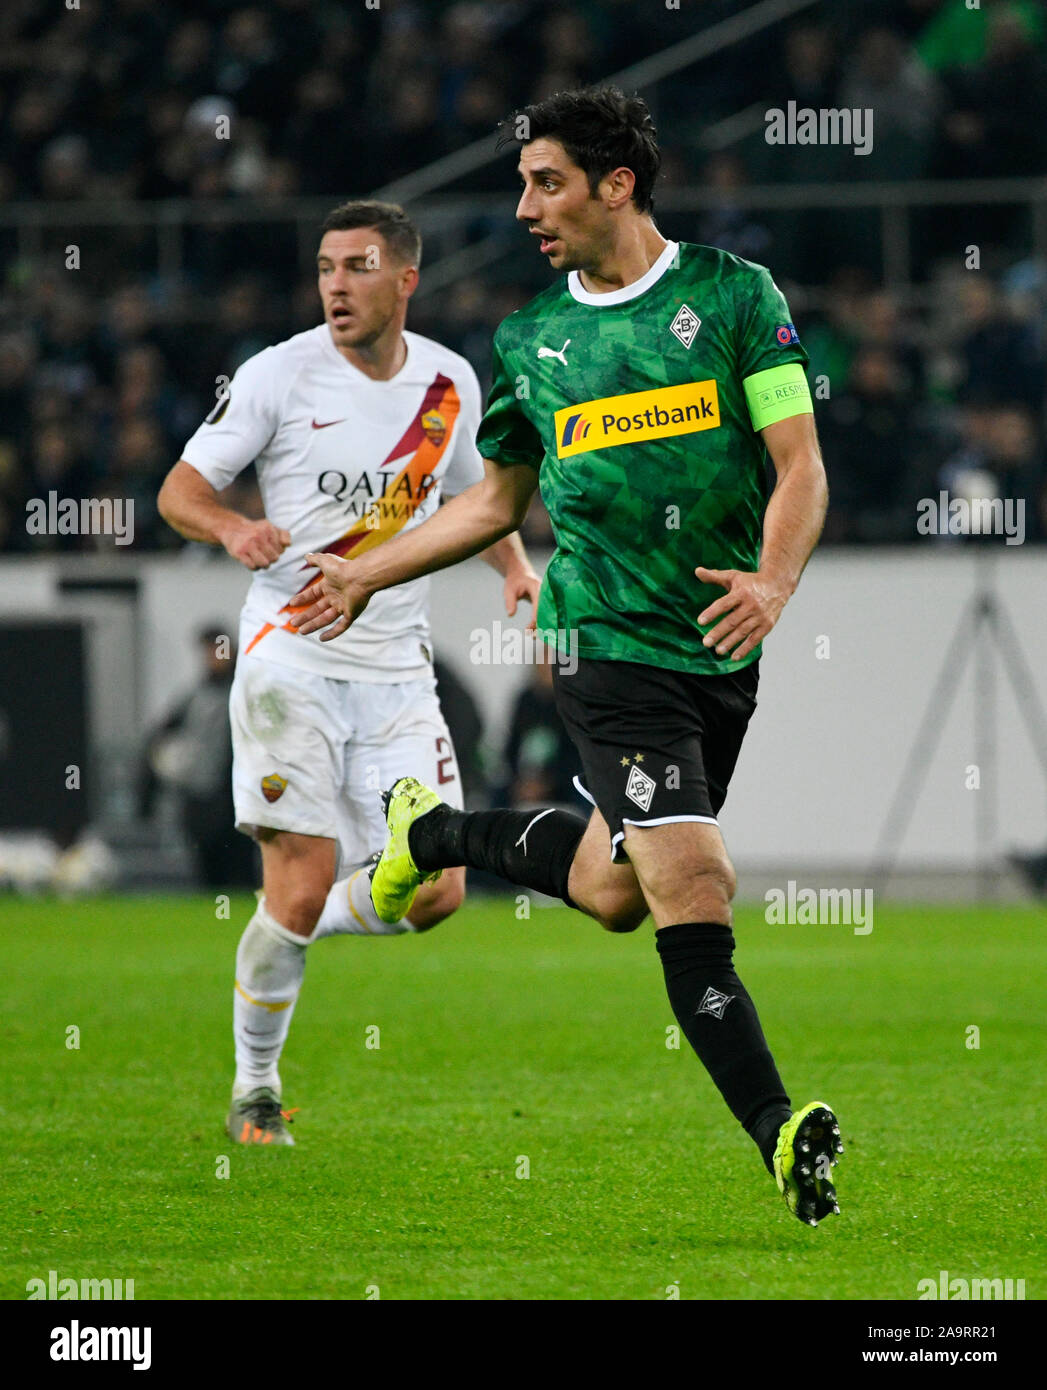 Borussia Park Monchengladbach, 7.11.2019,  Football: Europe League  Season 2019/20, matchday 4, Borussia Monchengladbach (MGL) vs. AS Rom (ROM):  Lars Stindl   UEFA REGULATIONS PROHIBIT ANY USE OF PHOTOGRAPHS AS IMAGE SEQUENCES AND/OR QUASI-VIDEO Stock Photo